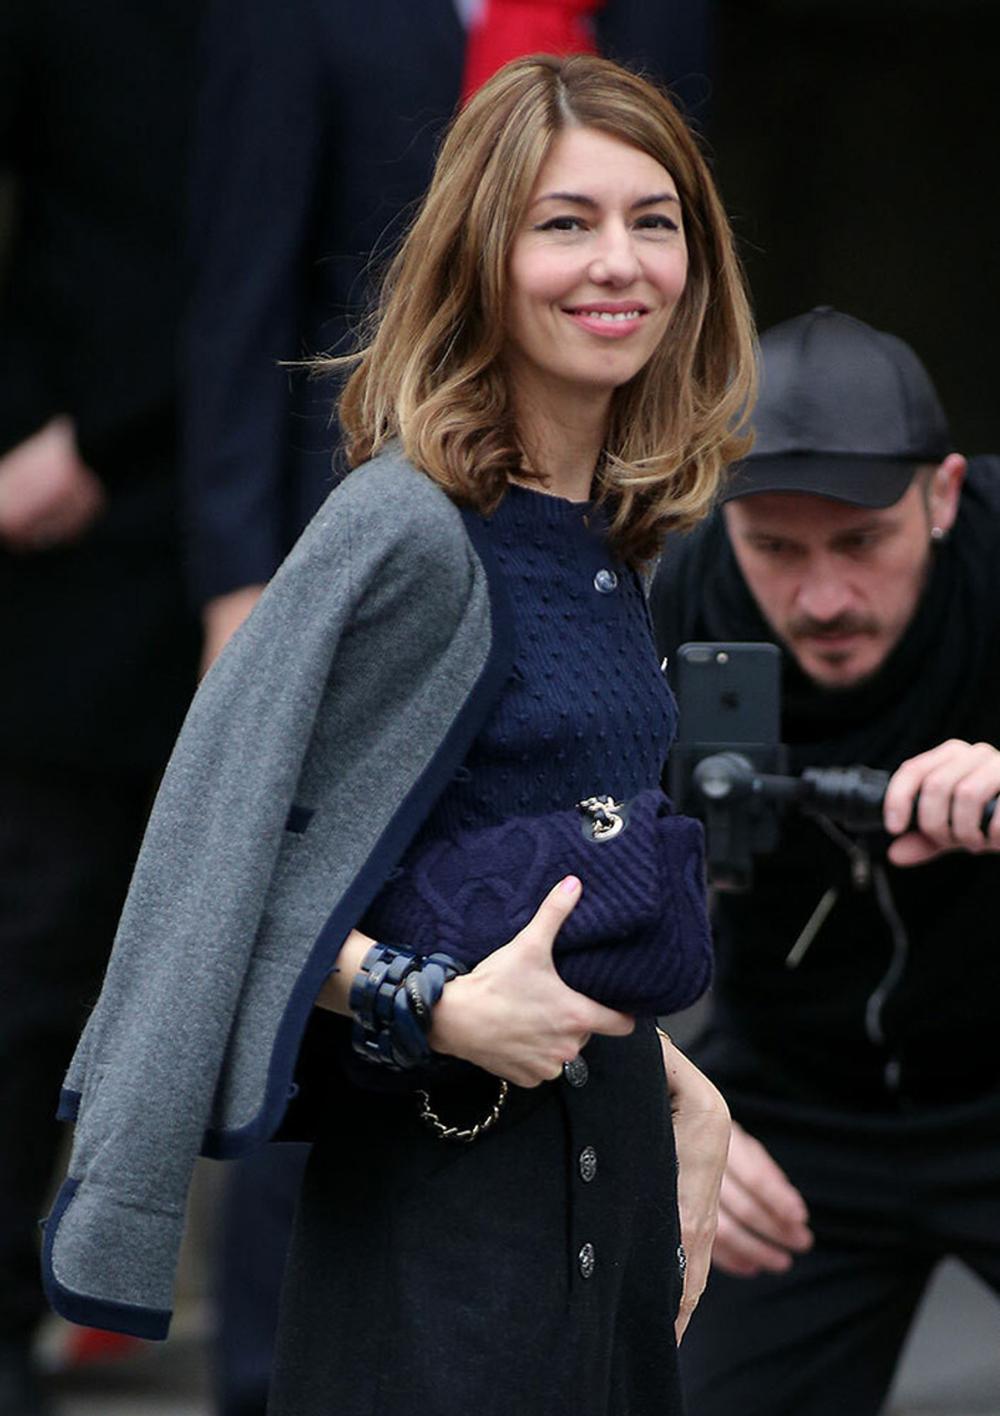 As seen on Sophia Coppola!
Price on sotheby's 2,300 pounds
Grey cashmere jacket with contrast navy trim from Paris / HAMBURG Collection, 2018 Metiers d'Art
- CC logo 'anchor' buttons
Size mark 40 FR. Never worn.